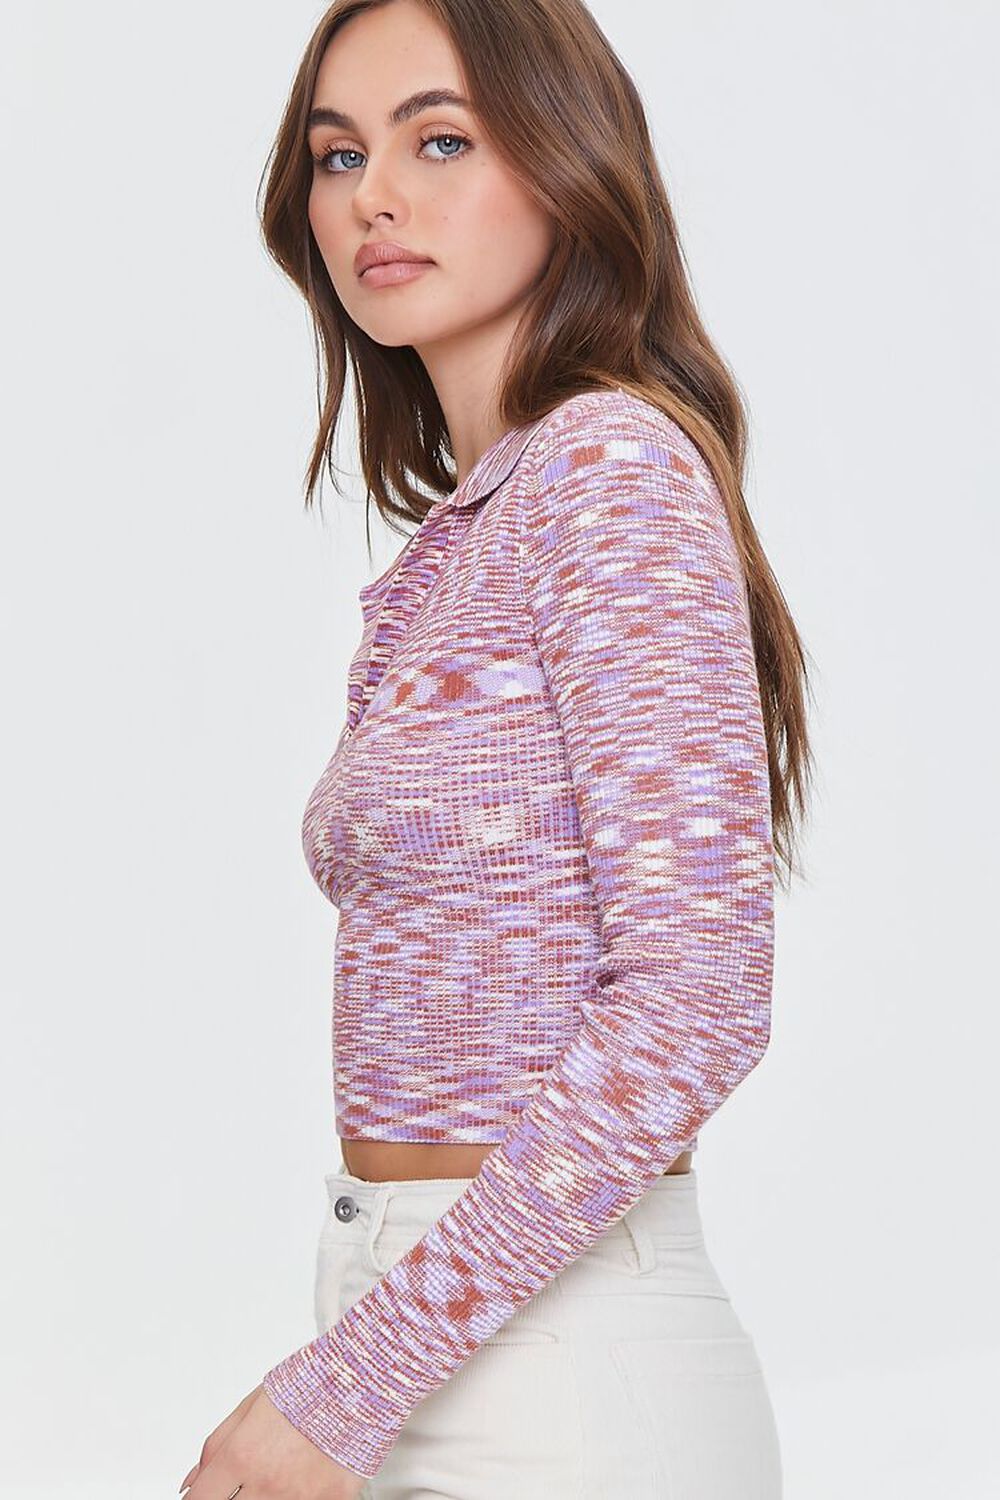 HIBISCUS/MULTI Marled Knit Cropped Sweater, image 3